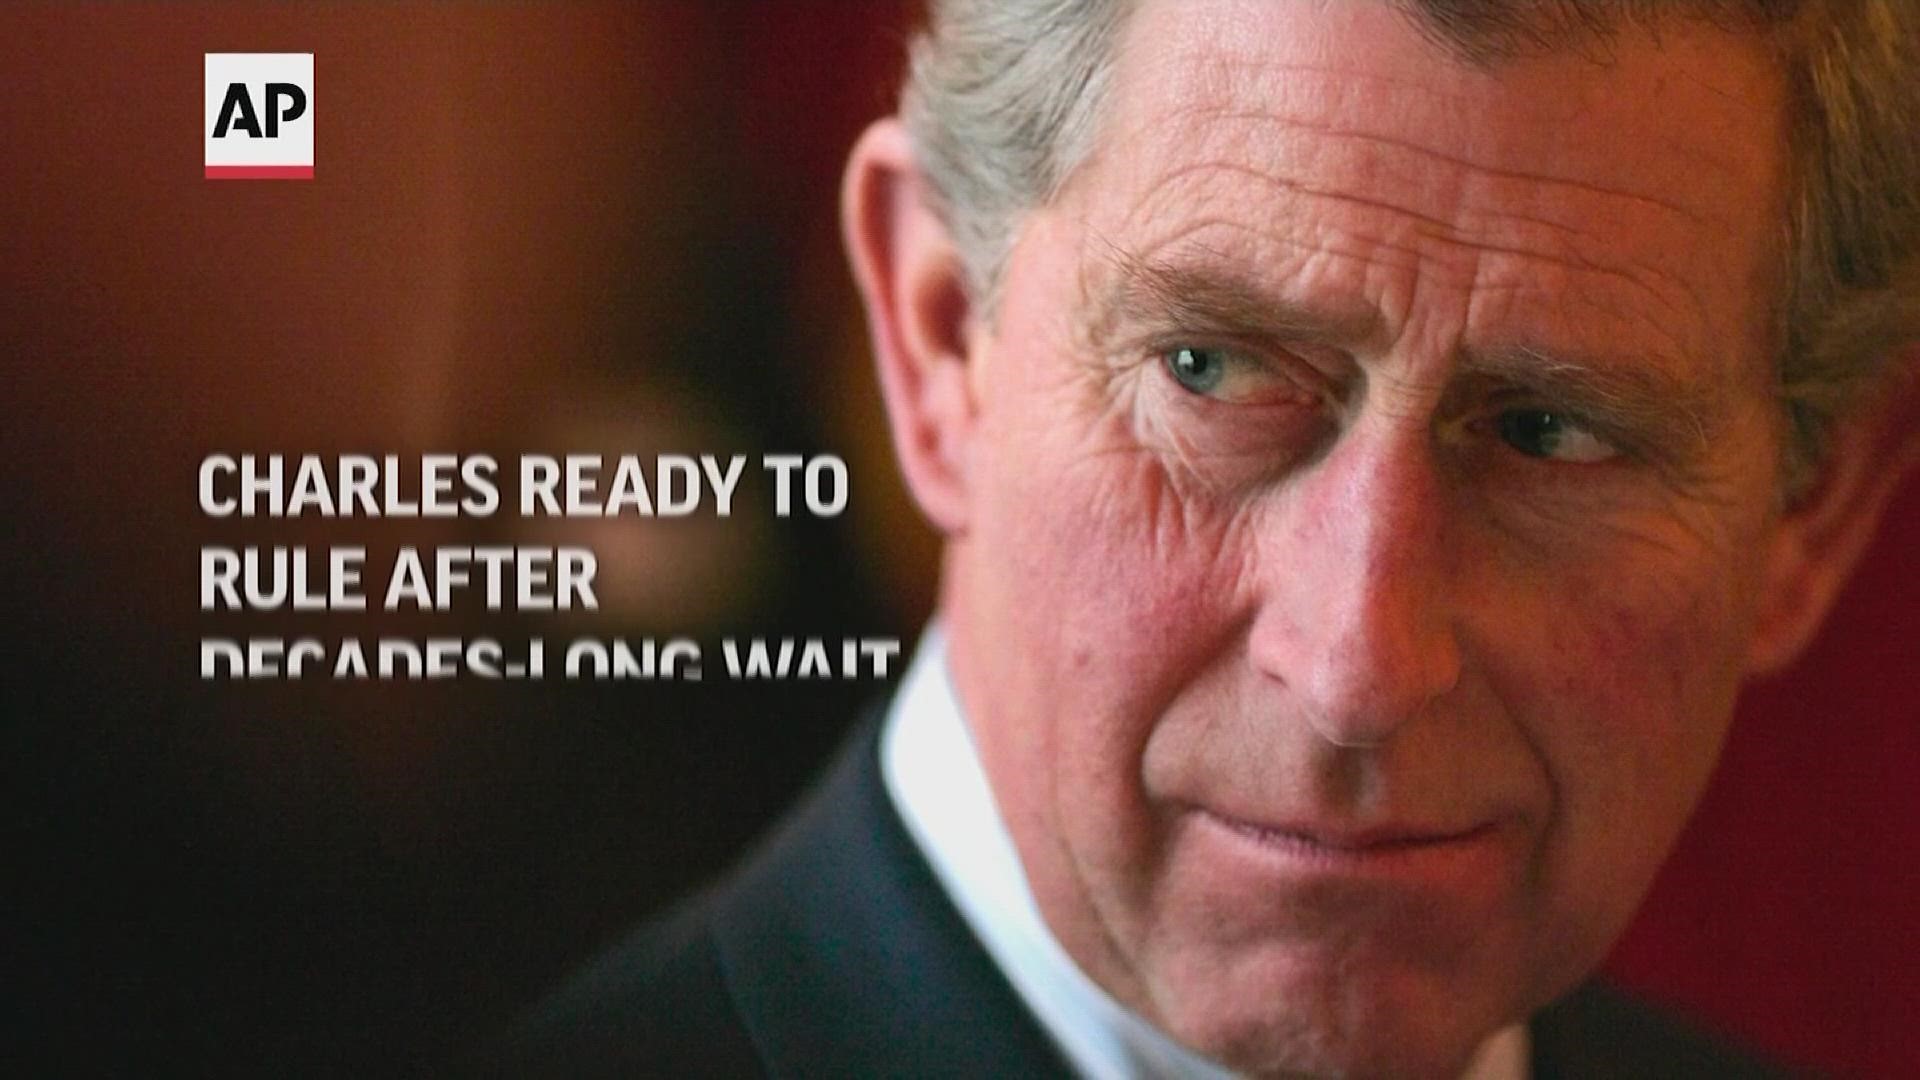 Prince Charles has been preparing for the crown his entire life. Now, at age 73, that moment has finally arrived.